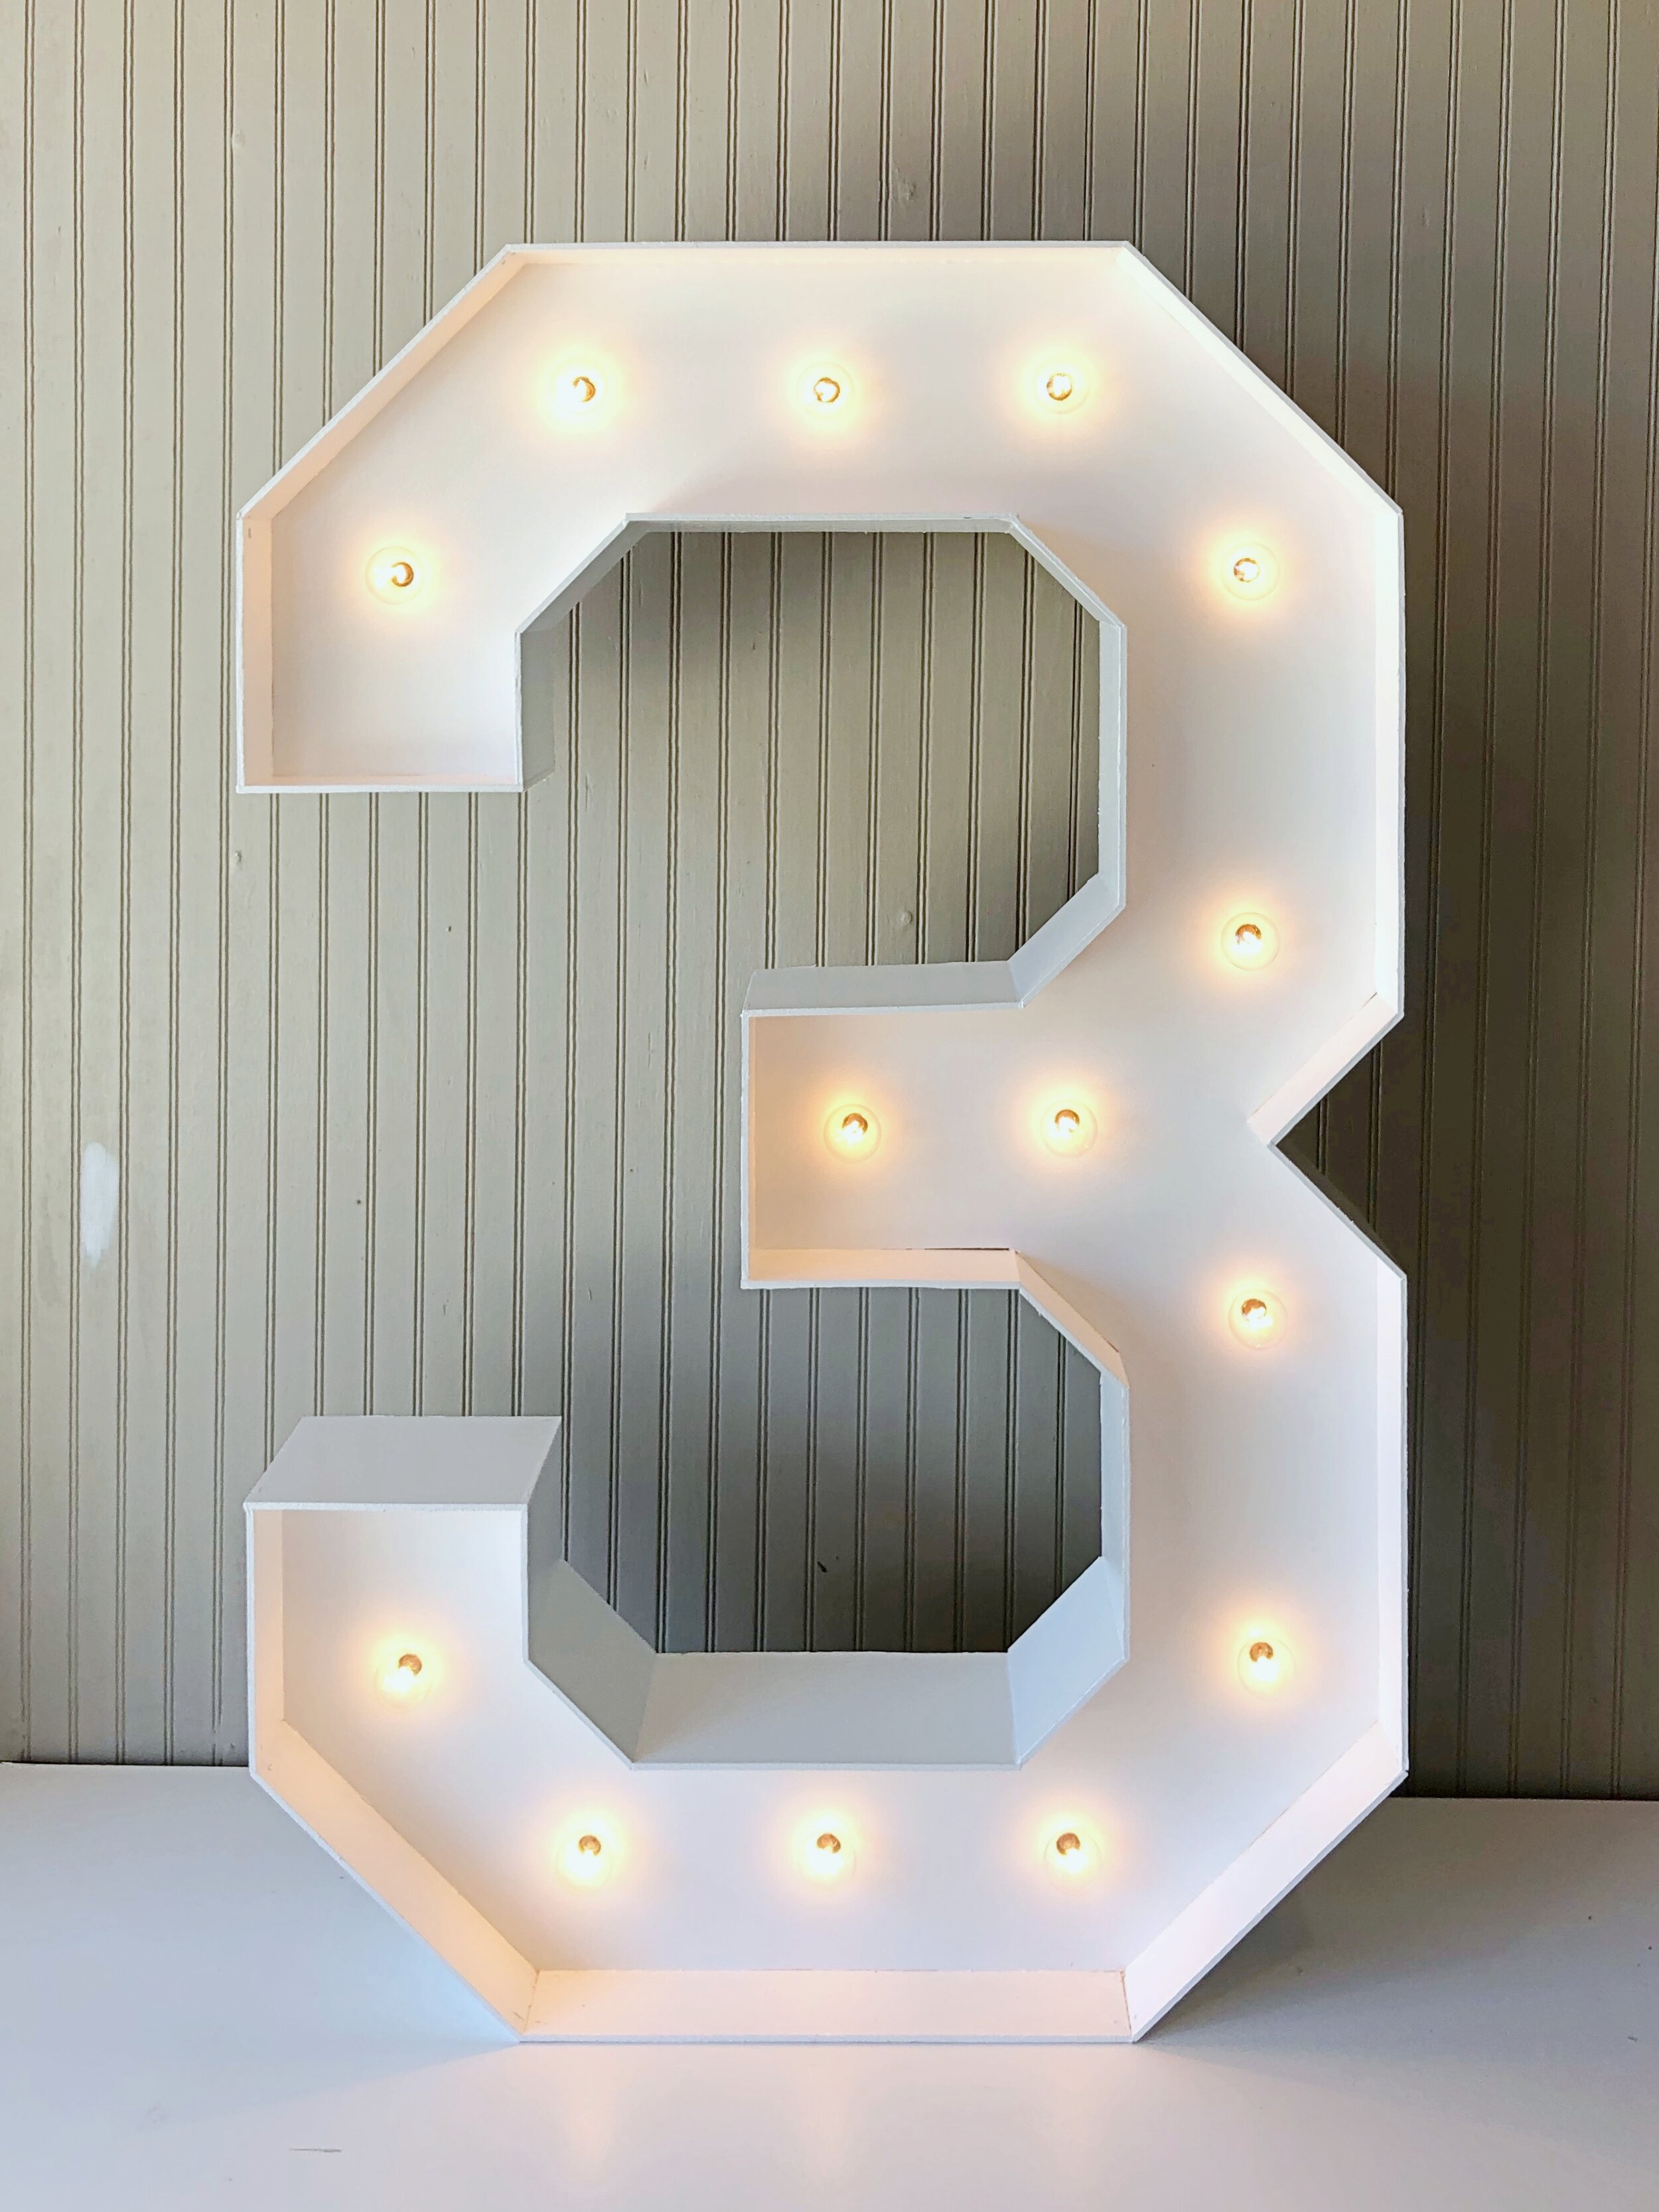 Number 4 FT White Light up 5FT Marquee Sale Big Letters with